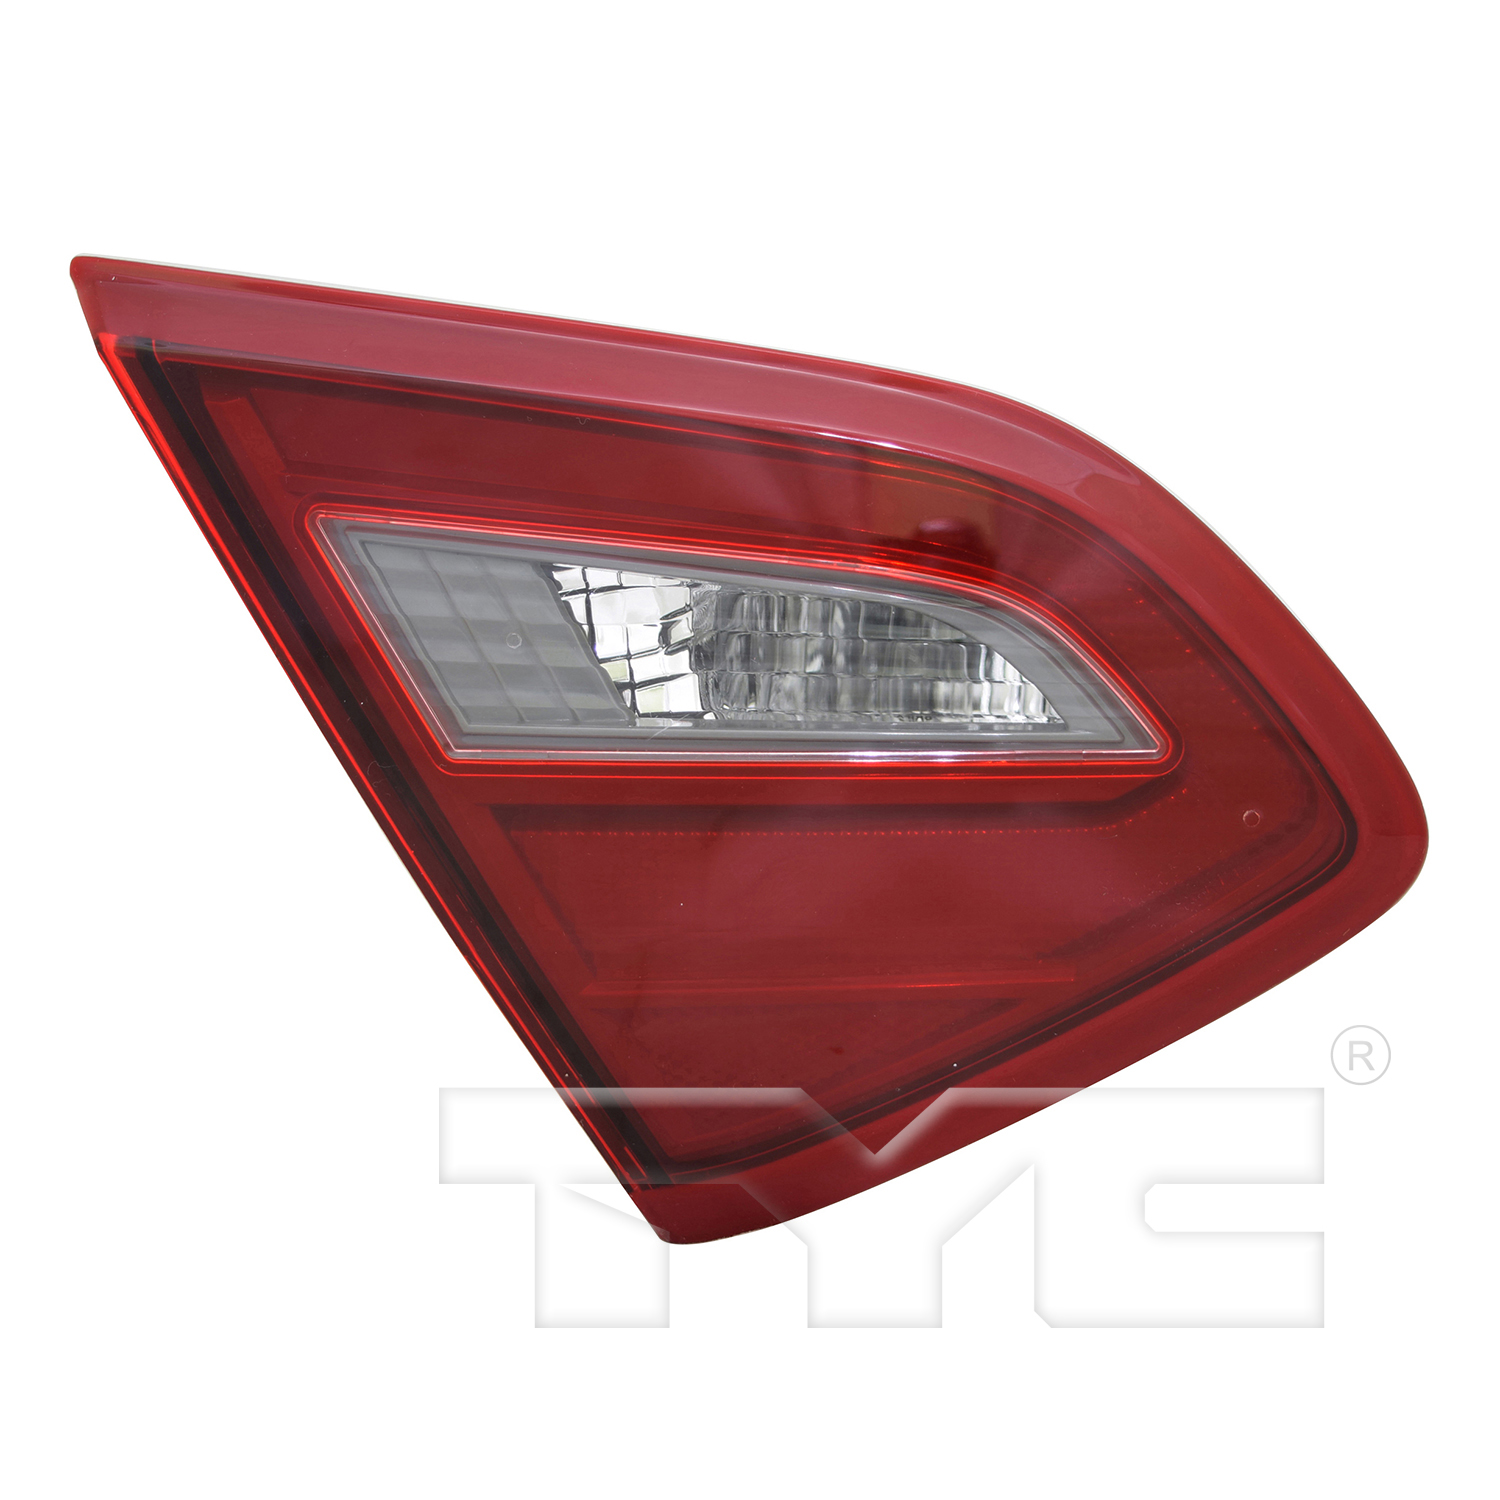 Aftermarket TAILLIGHTS for NISSAN - ALTIMA, ALTIMA,18-18,LT Taillamp assy inner